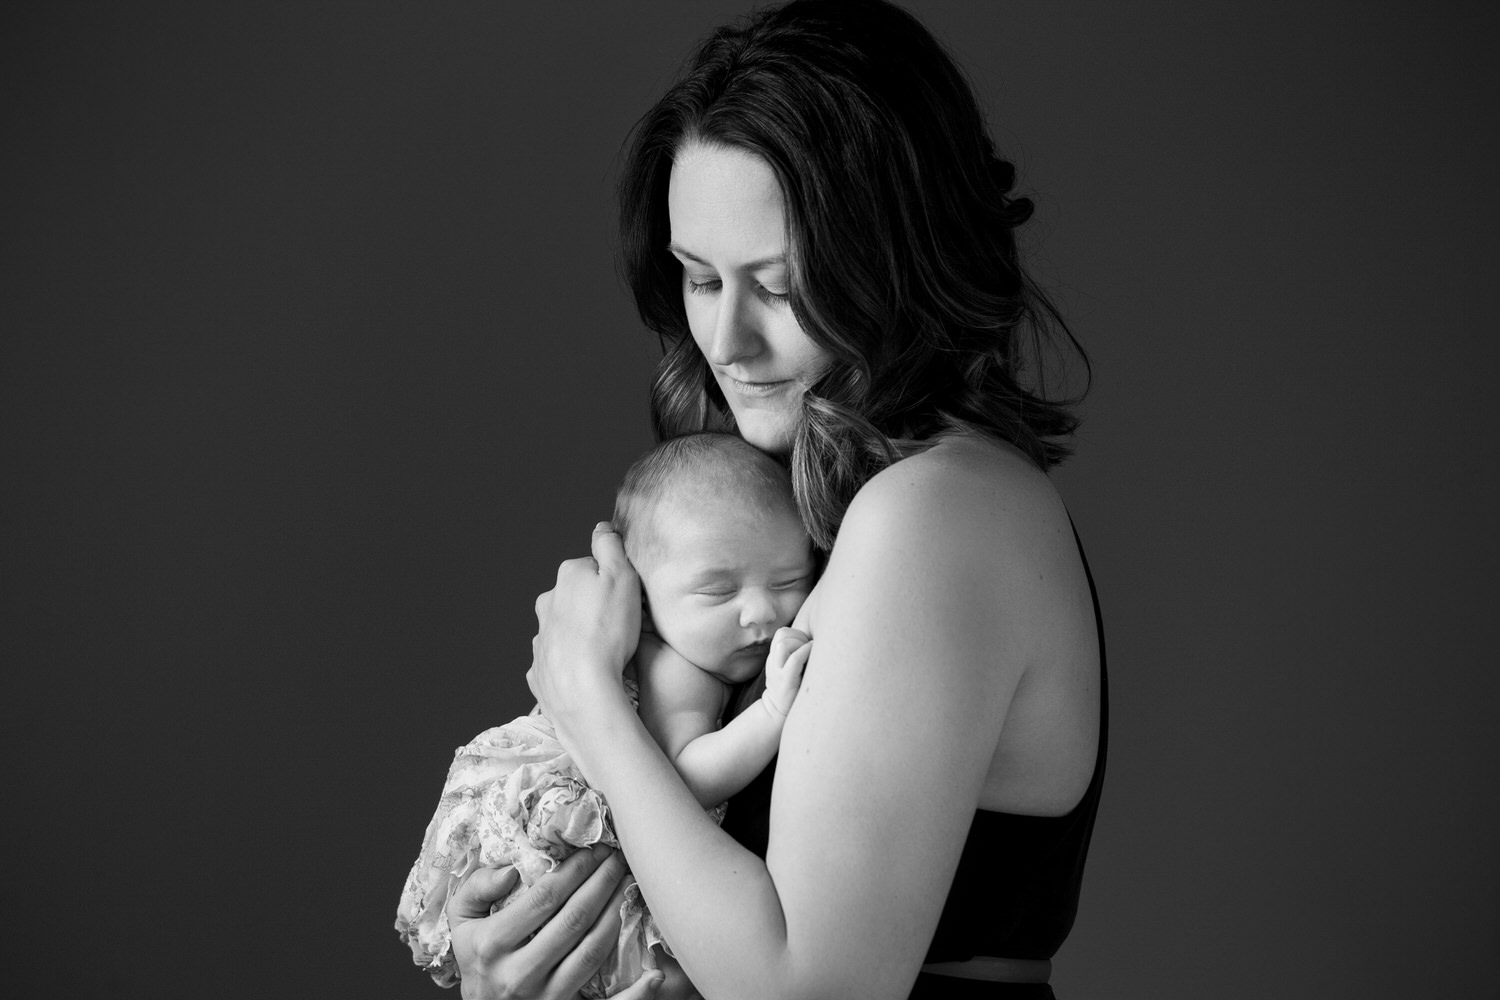 A new parent mom holding her newborn baby during a portrait studio shoto